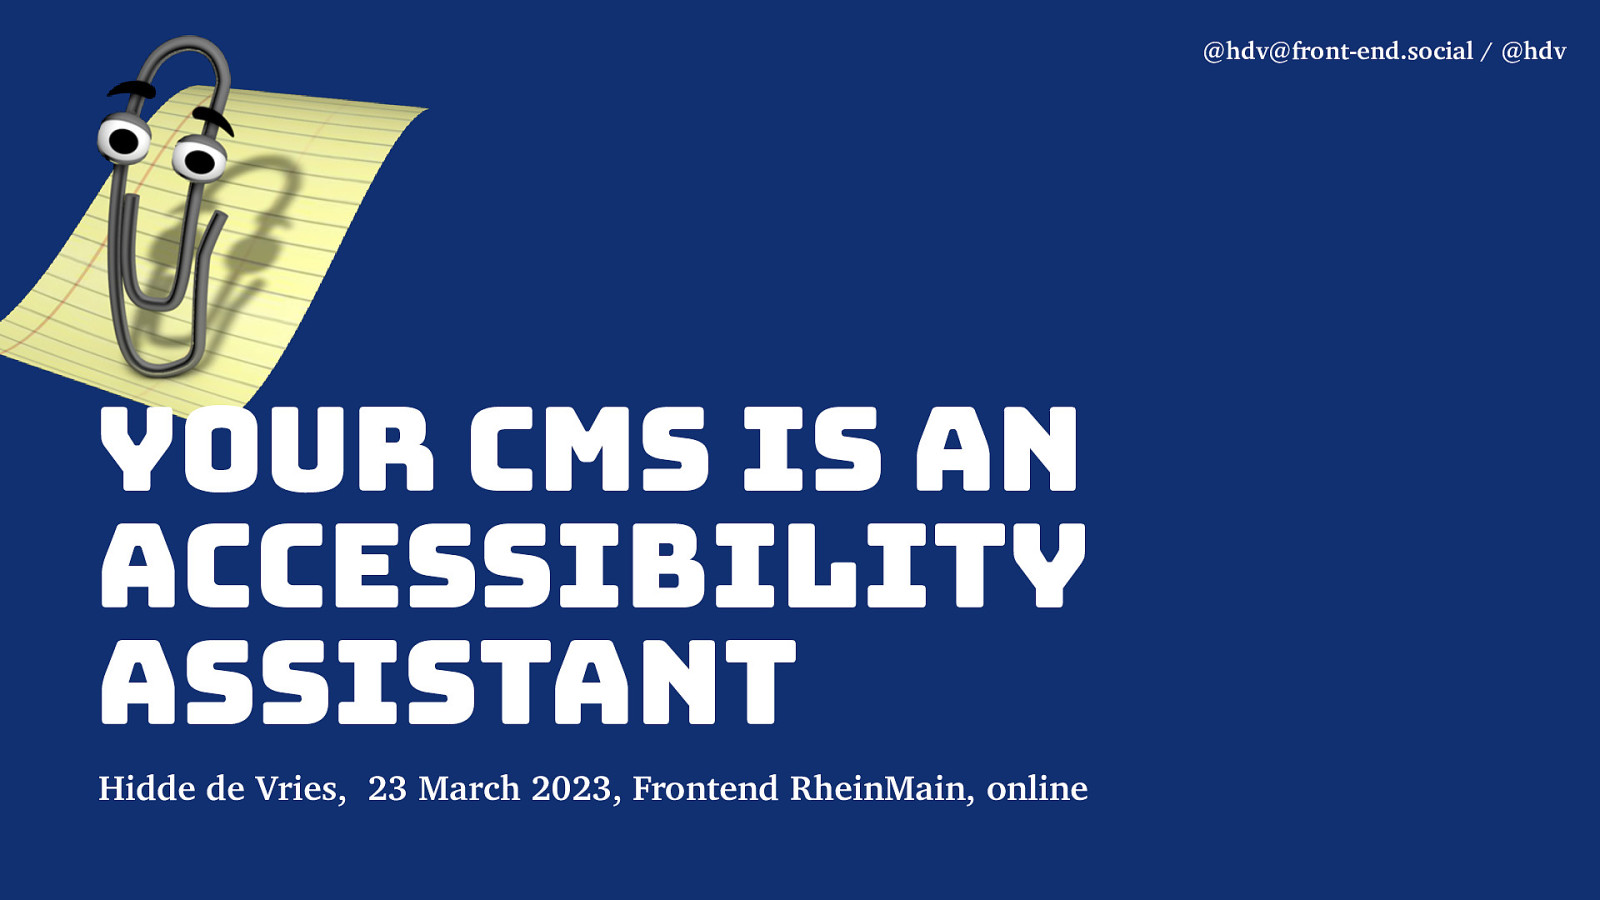 Your CMS is an accessibility assistant